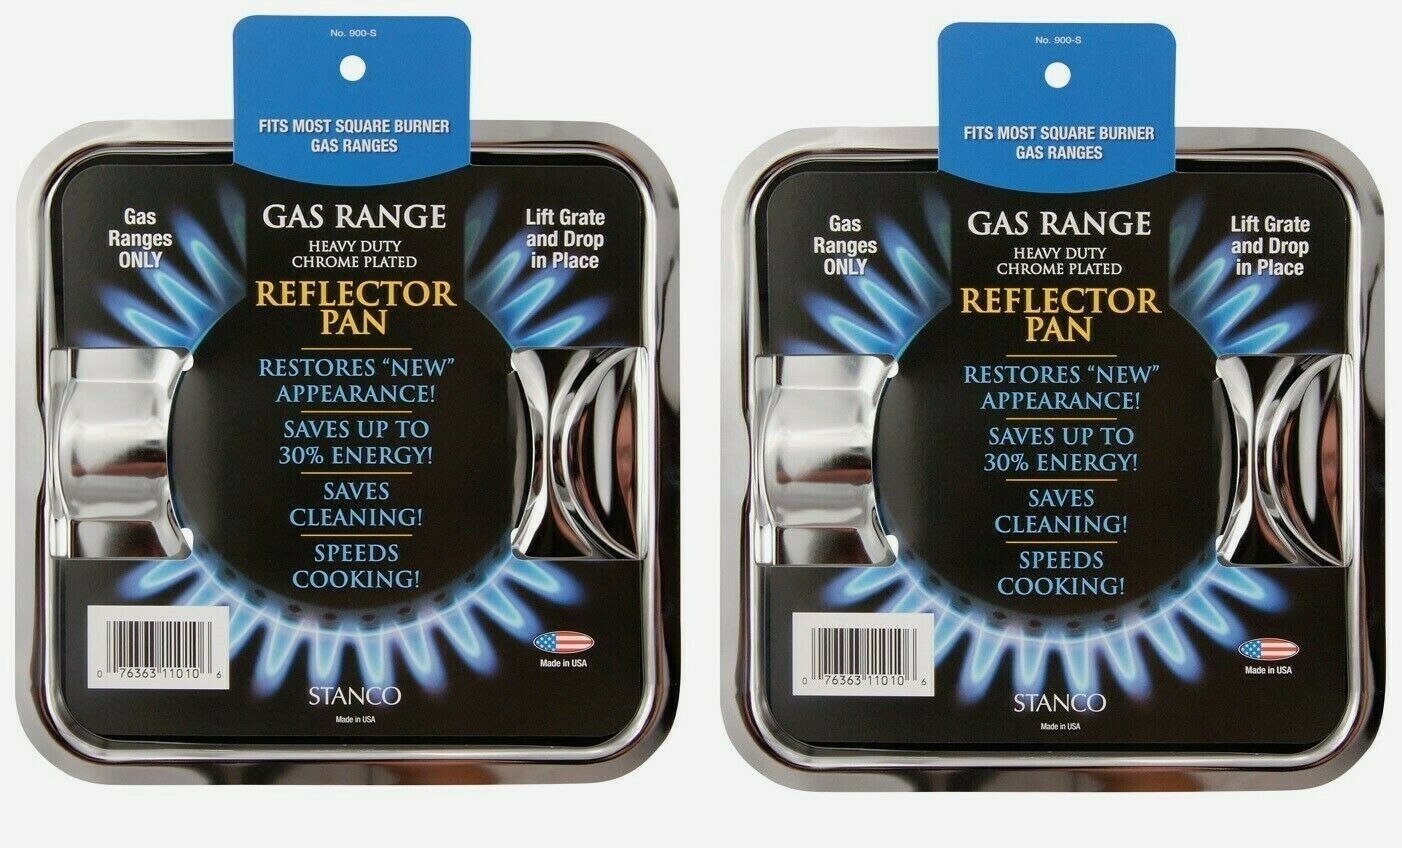 2 Stanco Steel REFLECTOR PAN Gas Range Fits Most Square Burners Heavy-Duty 900-S